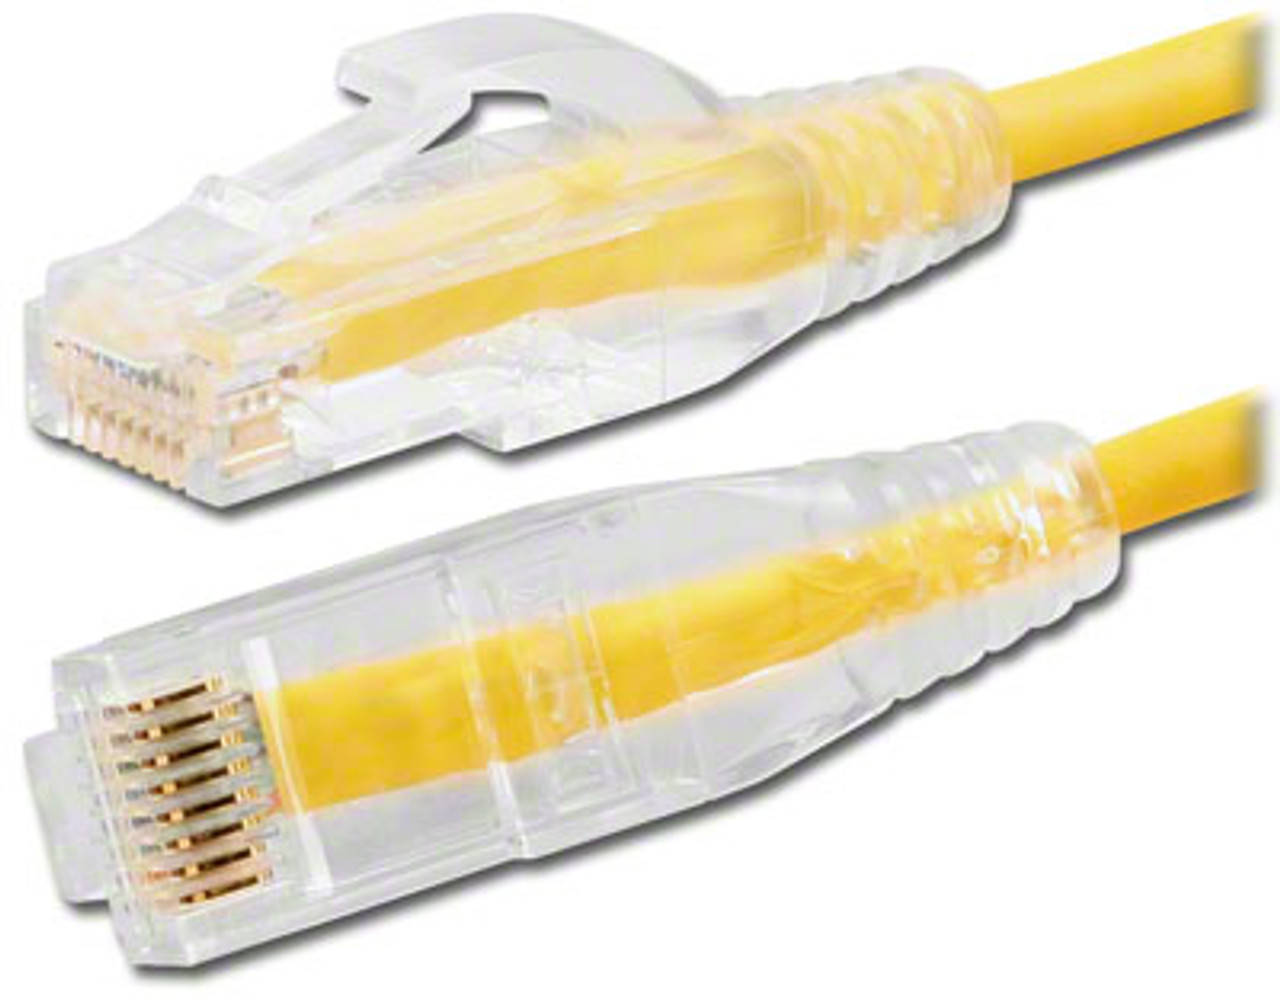 2-FT- Mini Cat 6 Thin Patch Cable - Yellow Jacket - DC-56NP-2'YWTB - TMB